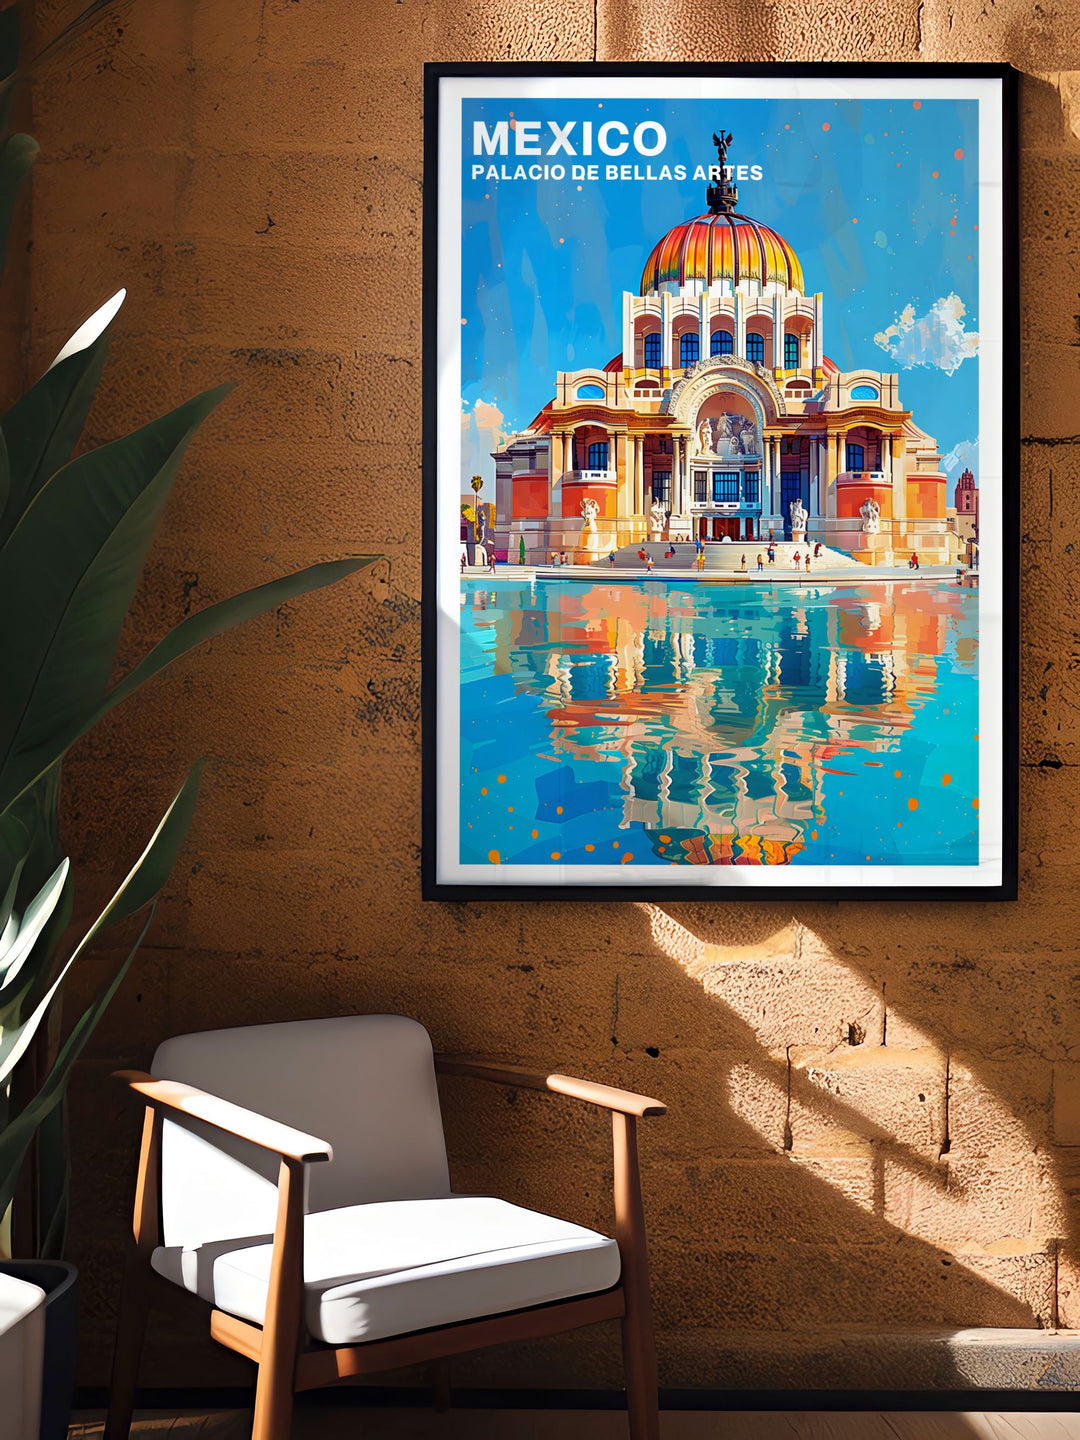 This detailed poster of the Palacio de Bellas Artes illustrates its magnificent murals and grand facade, making it an excellent addition to any art collection celebrating Mexican culture.